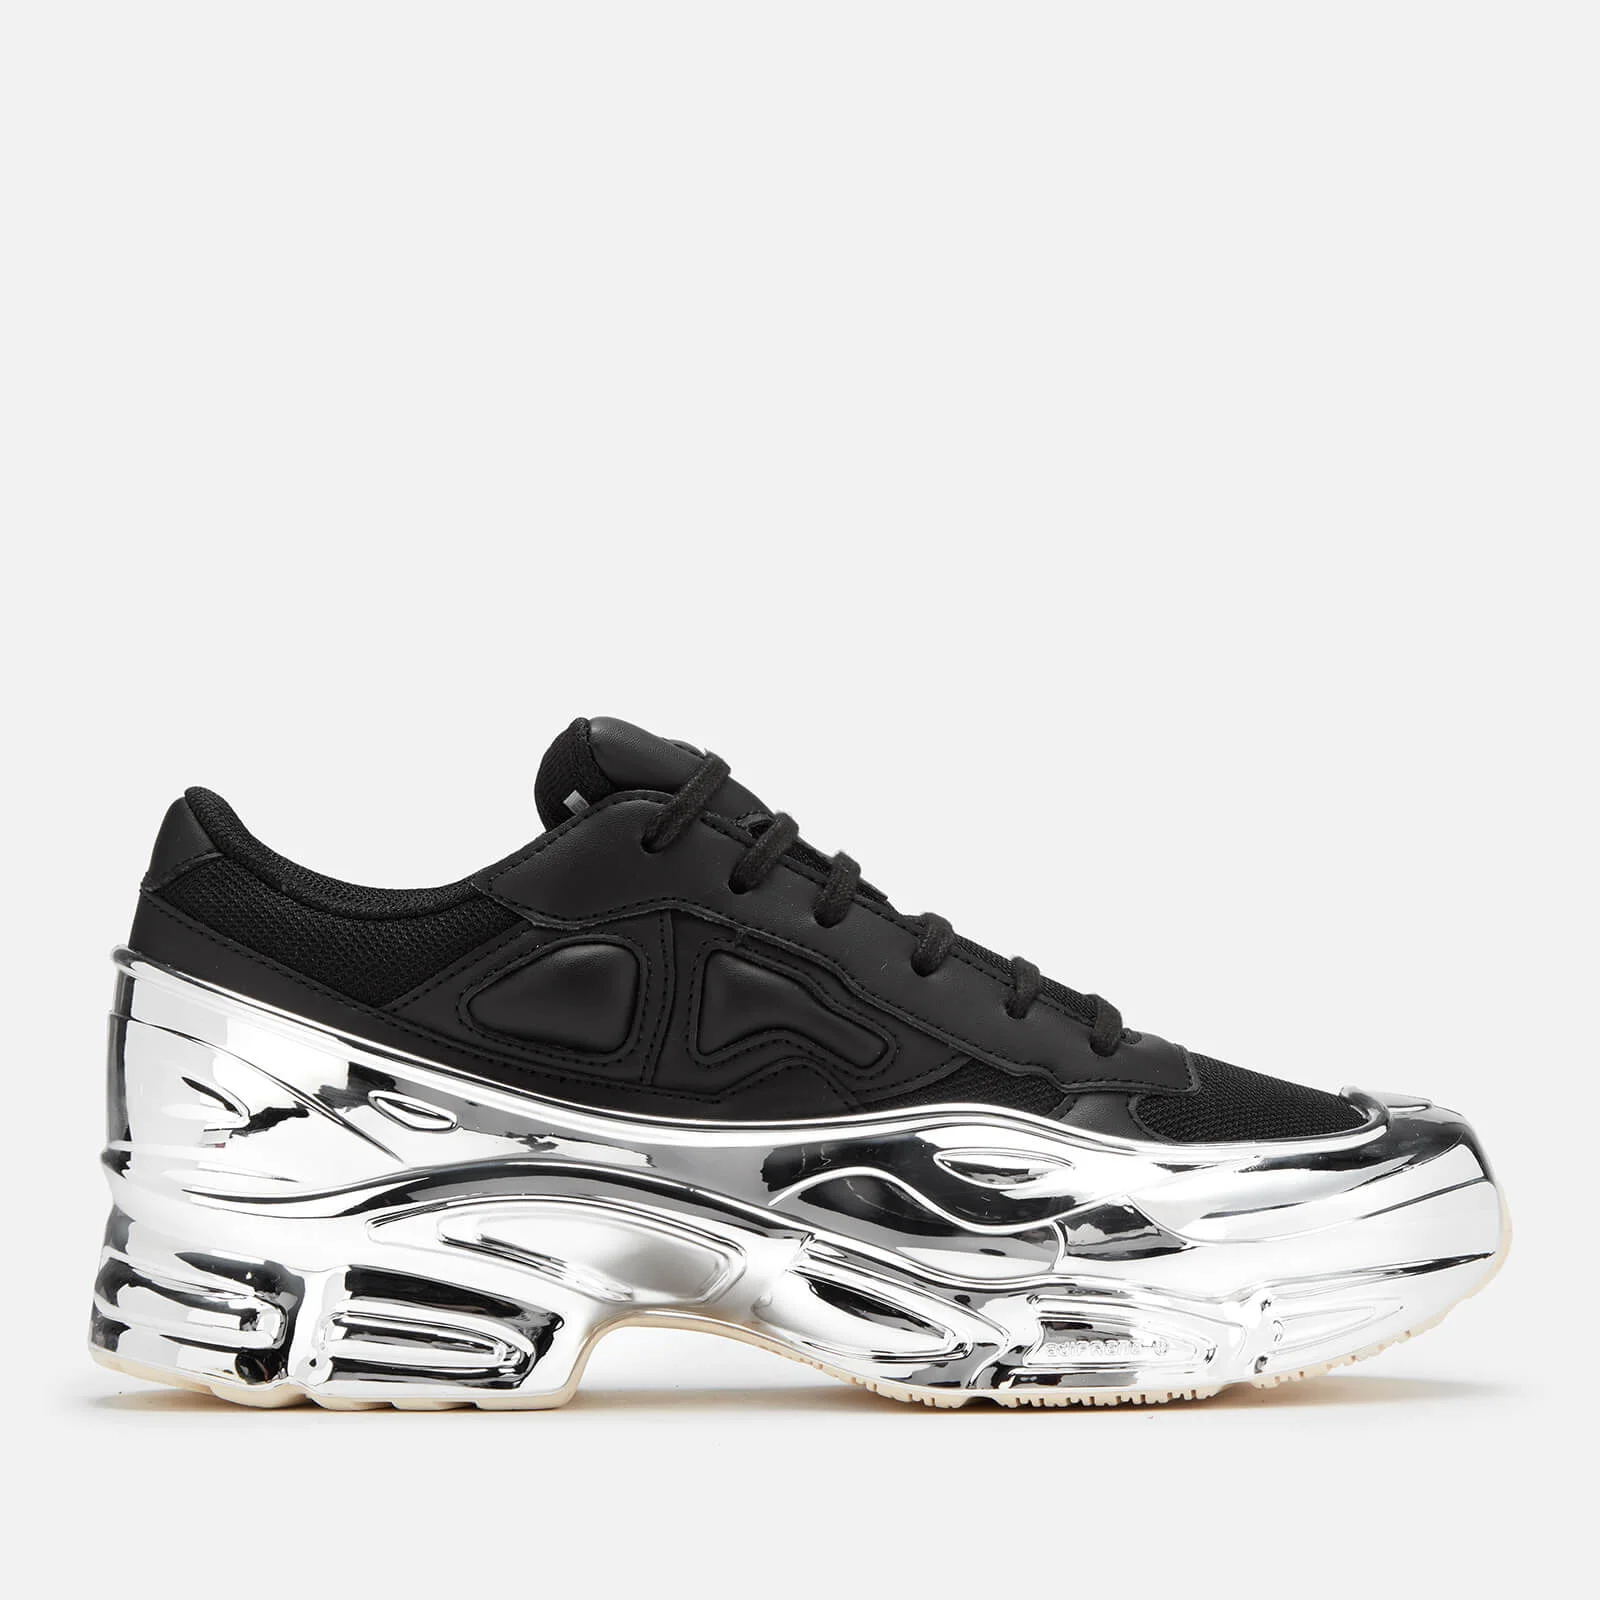 adidas by Raf Simons Men's Ozweego Trainers - C Black/Silver Image 1